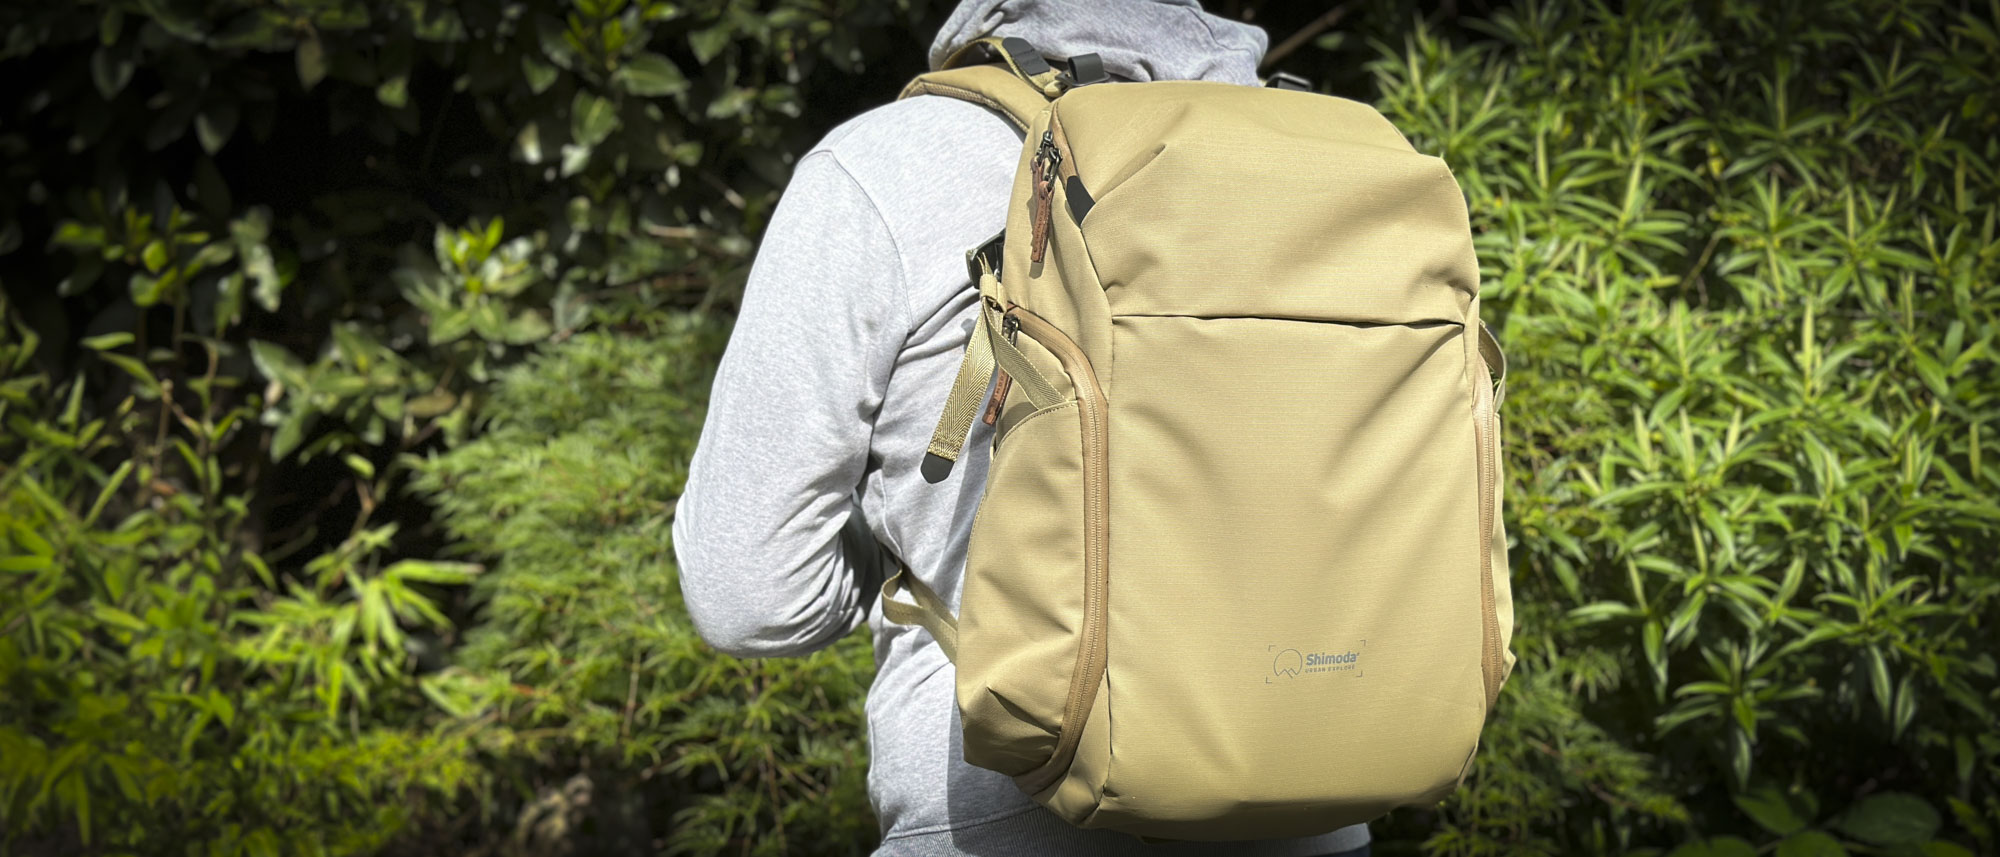 Shimoda Urban Explore 25 backpack review: a feature-packed pack